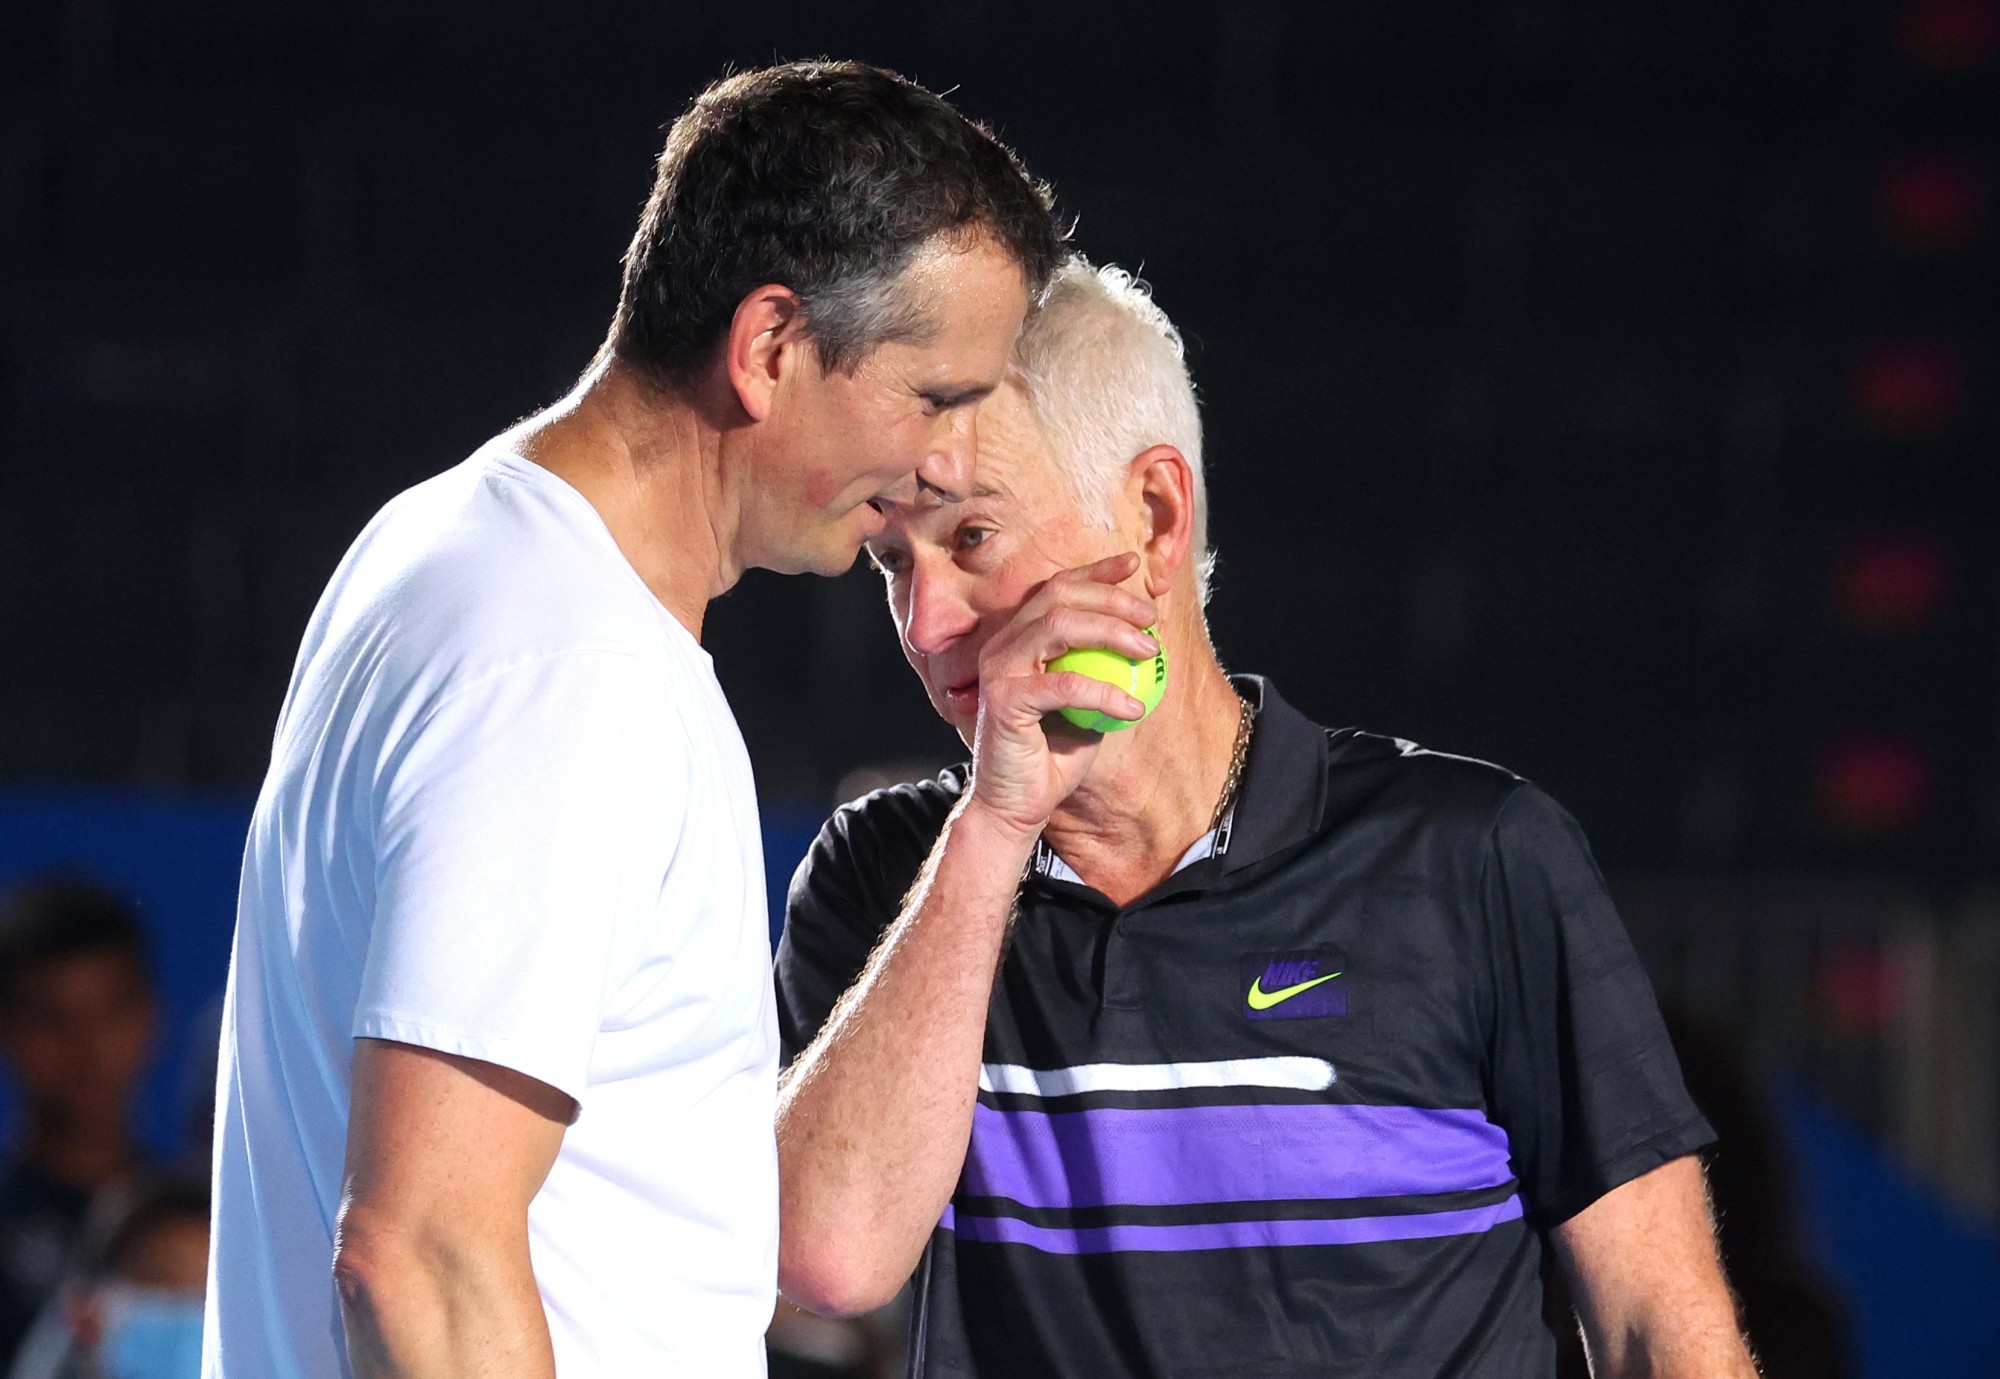 Tennis legends John McEnroe (R) and Richard Krajicek talk during the Men’s Doubles Exhibition Game against Mark Philippoussis and Greg Rusedski for Expo 2020 Dubai Tennis Week at the Expo Sports Arena m52446